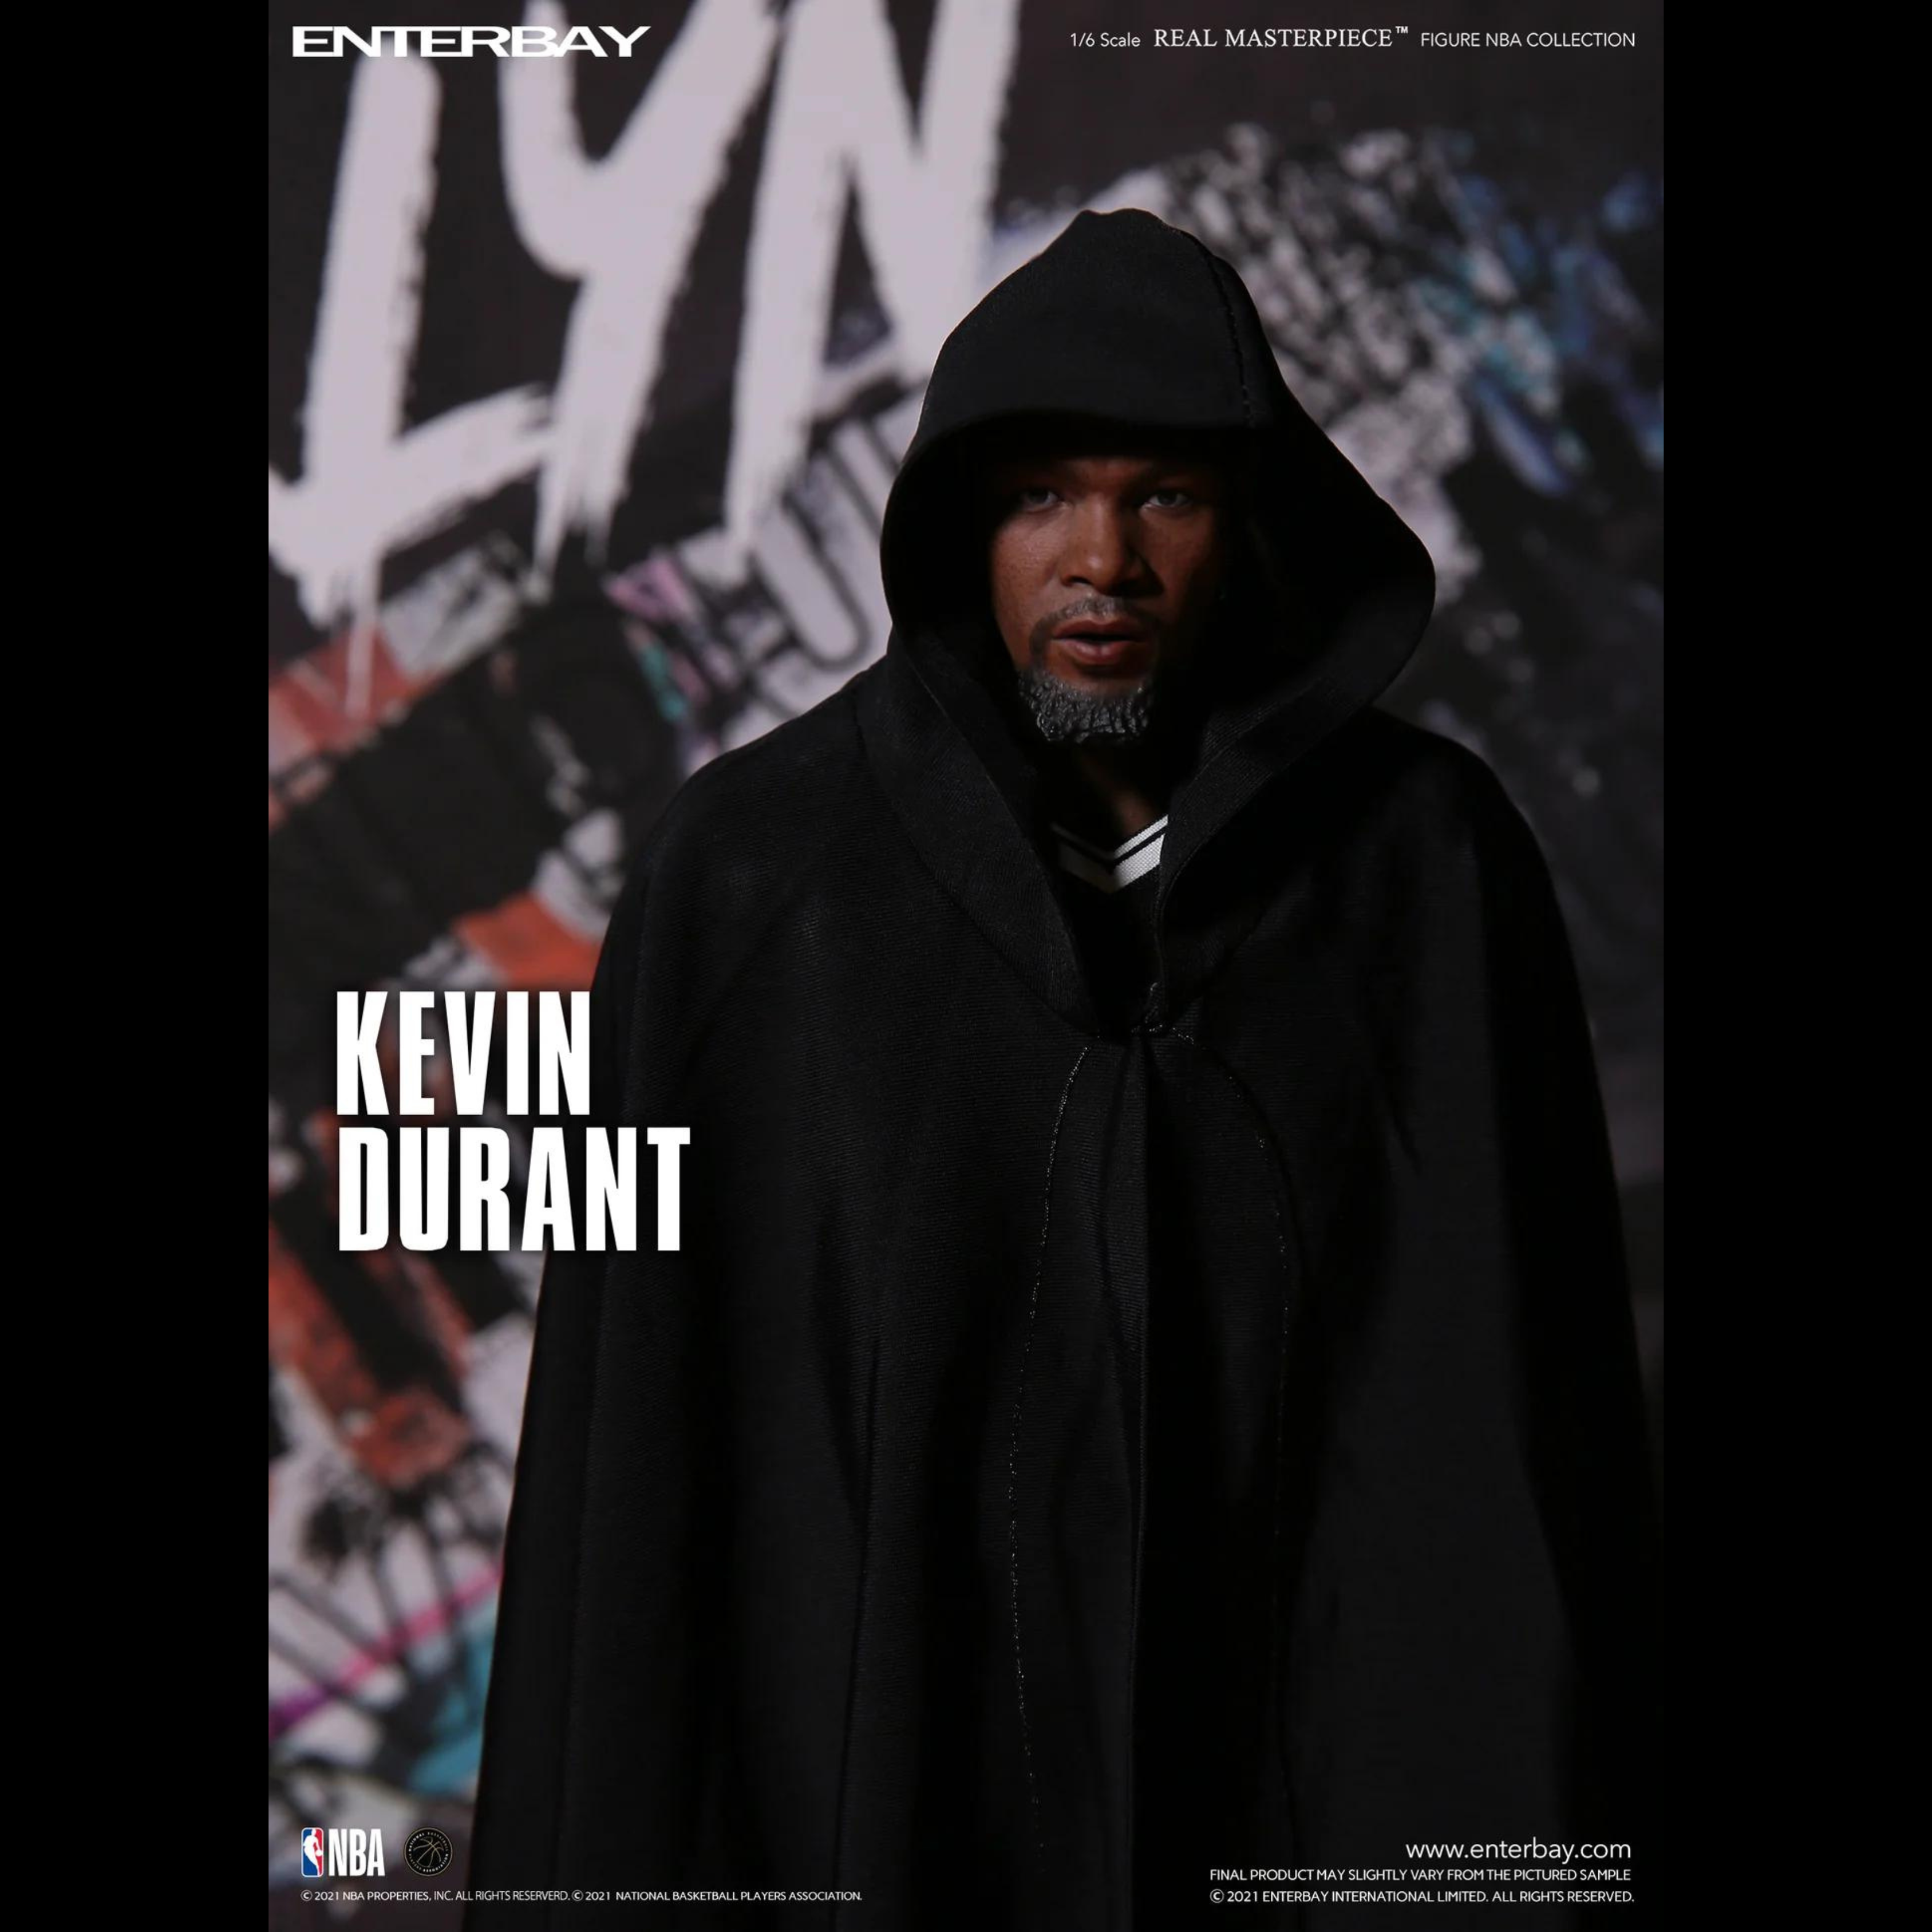 Enterbay 1/6 NBA Collection: Kevin Durant NBA 12inches Action Figure